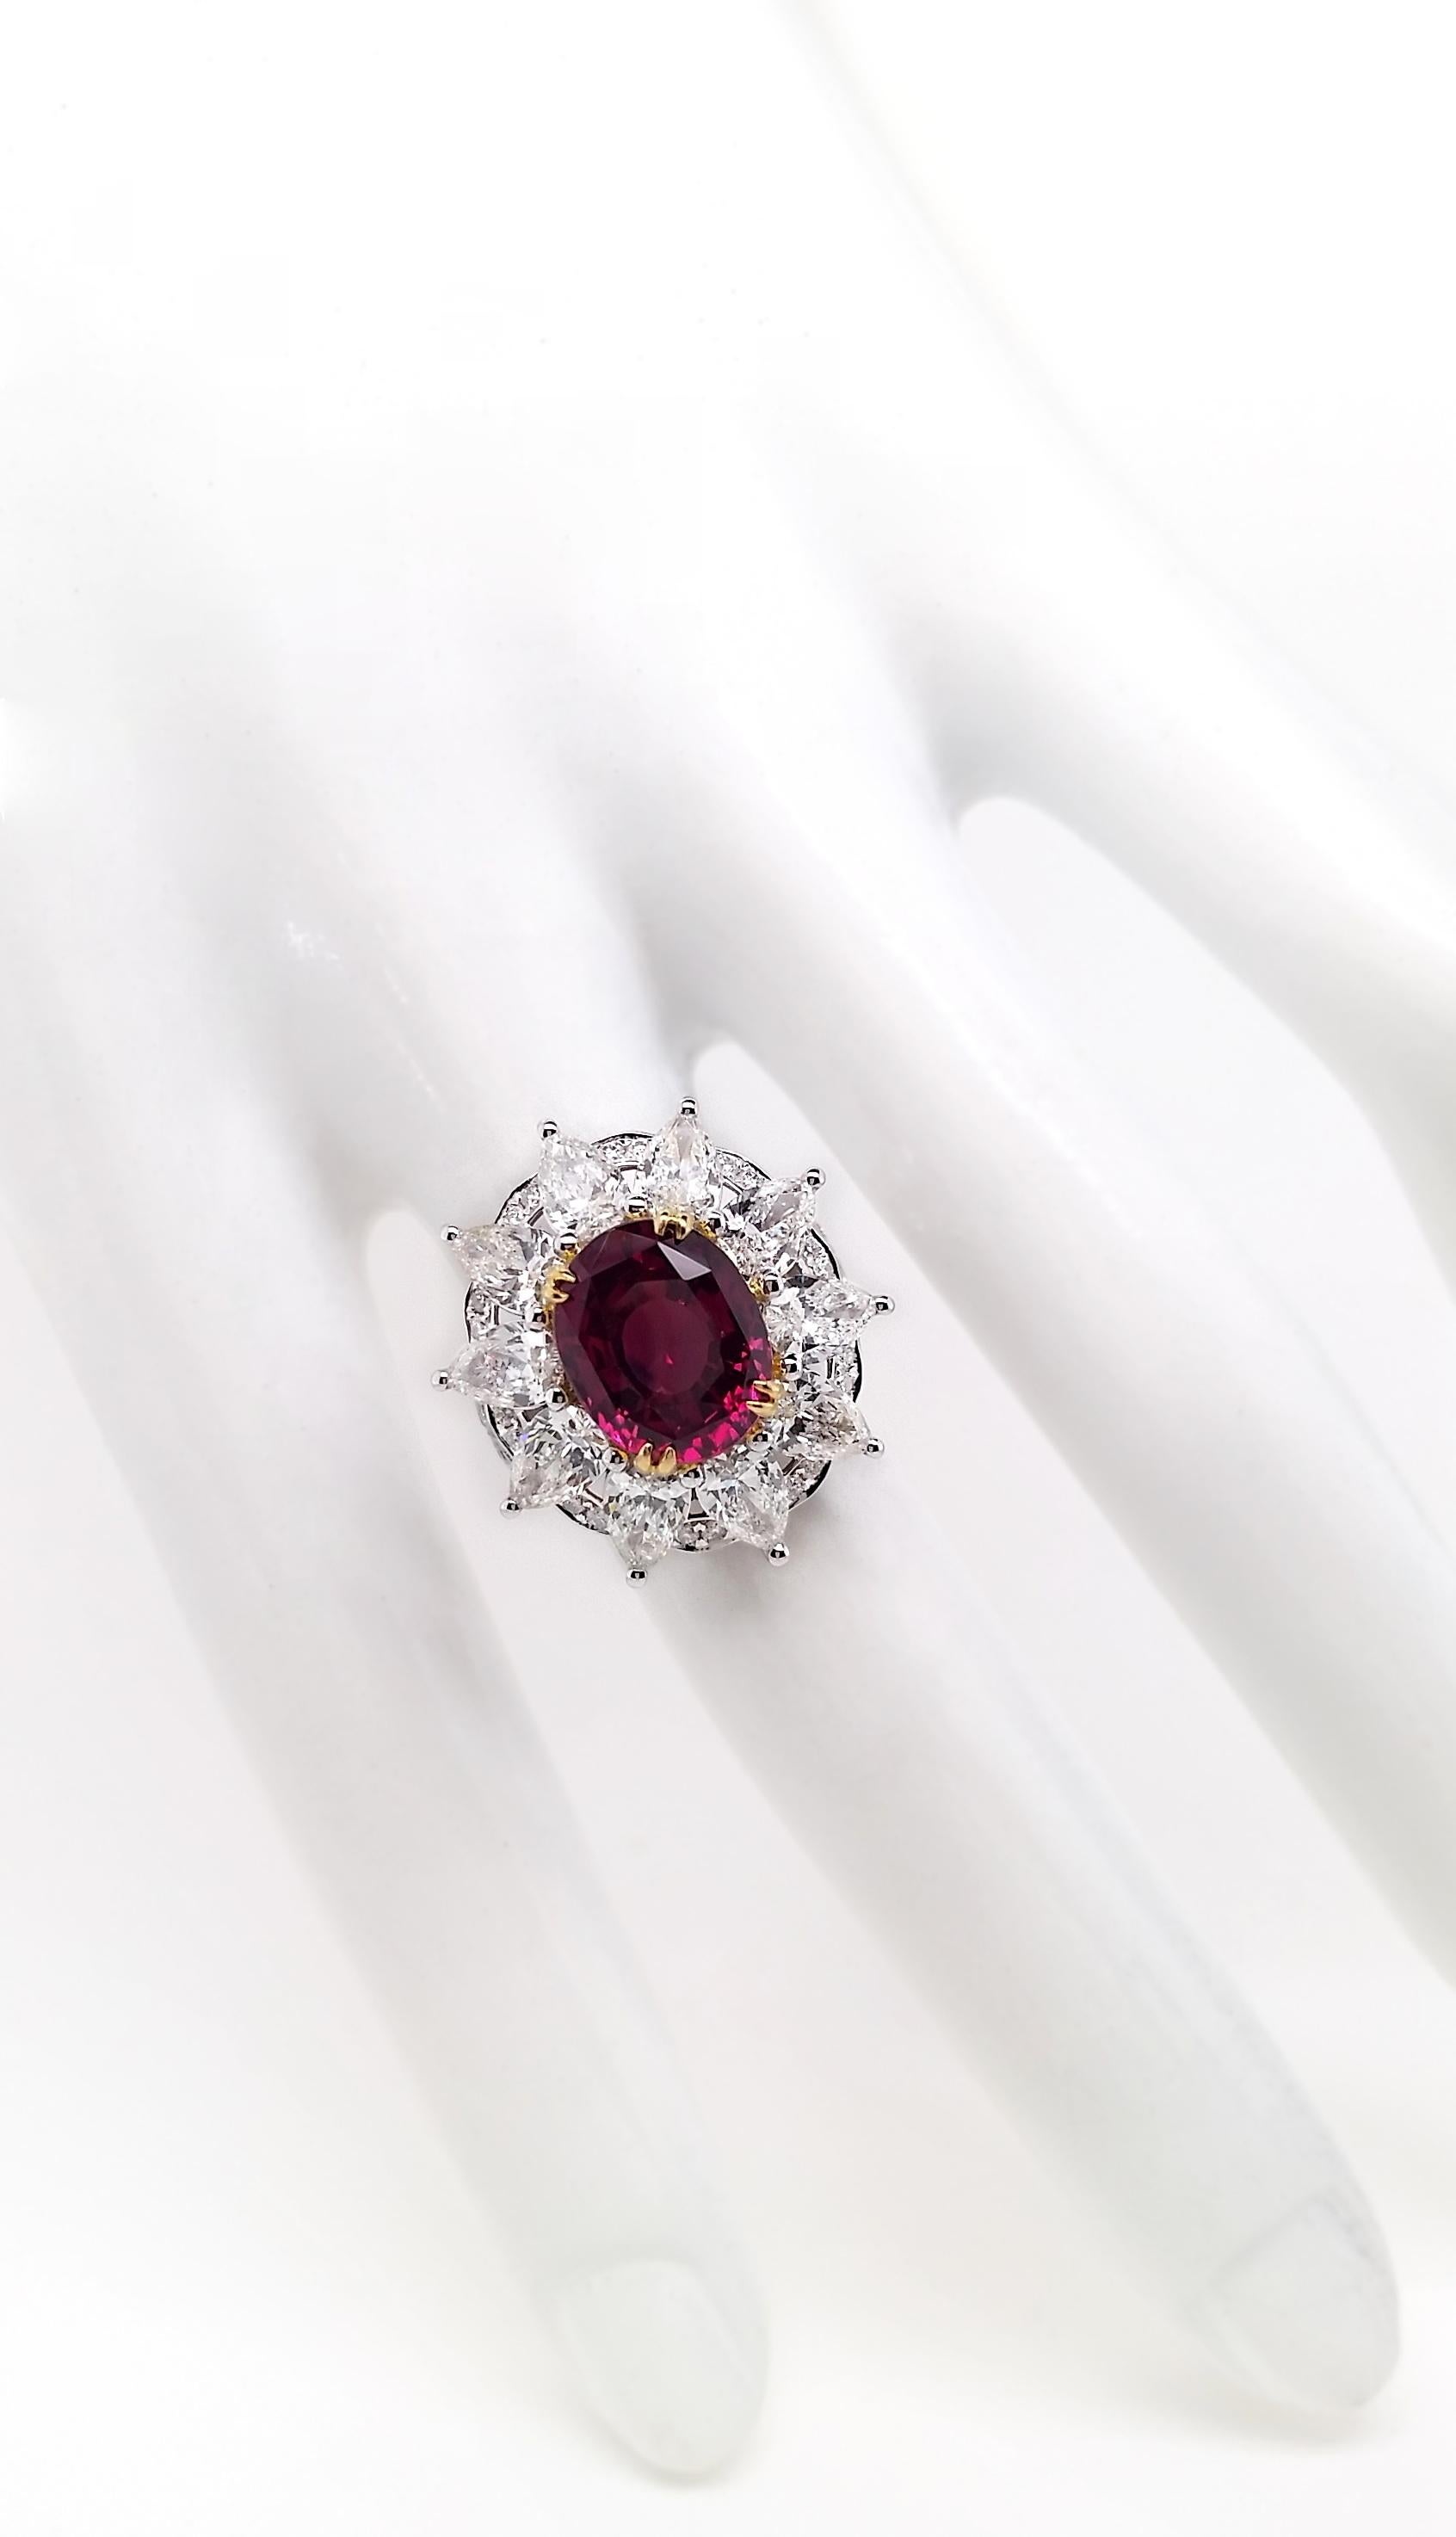 Immerse yourself in luxury with a 6.03-carat Burma ruby, skilfully crafted in an oval mixed-cut. This stunning gem, boasting Fine Color Quality as certified by the IGI,  takes centre stage in a captivating 18K yellow and white gold ring, adorned by